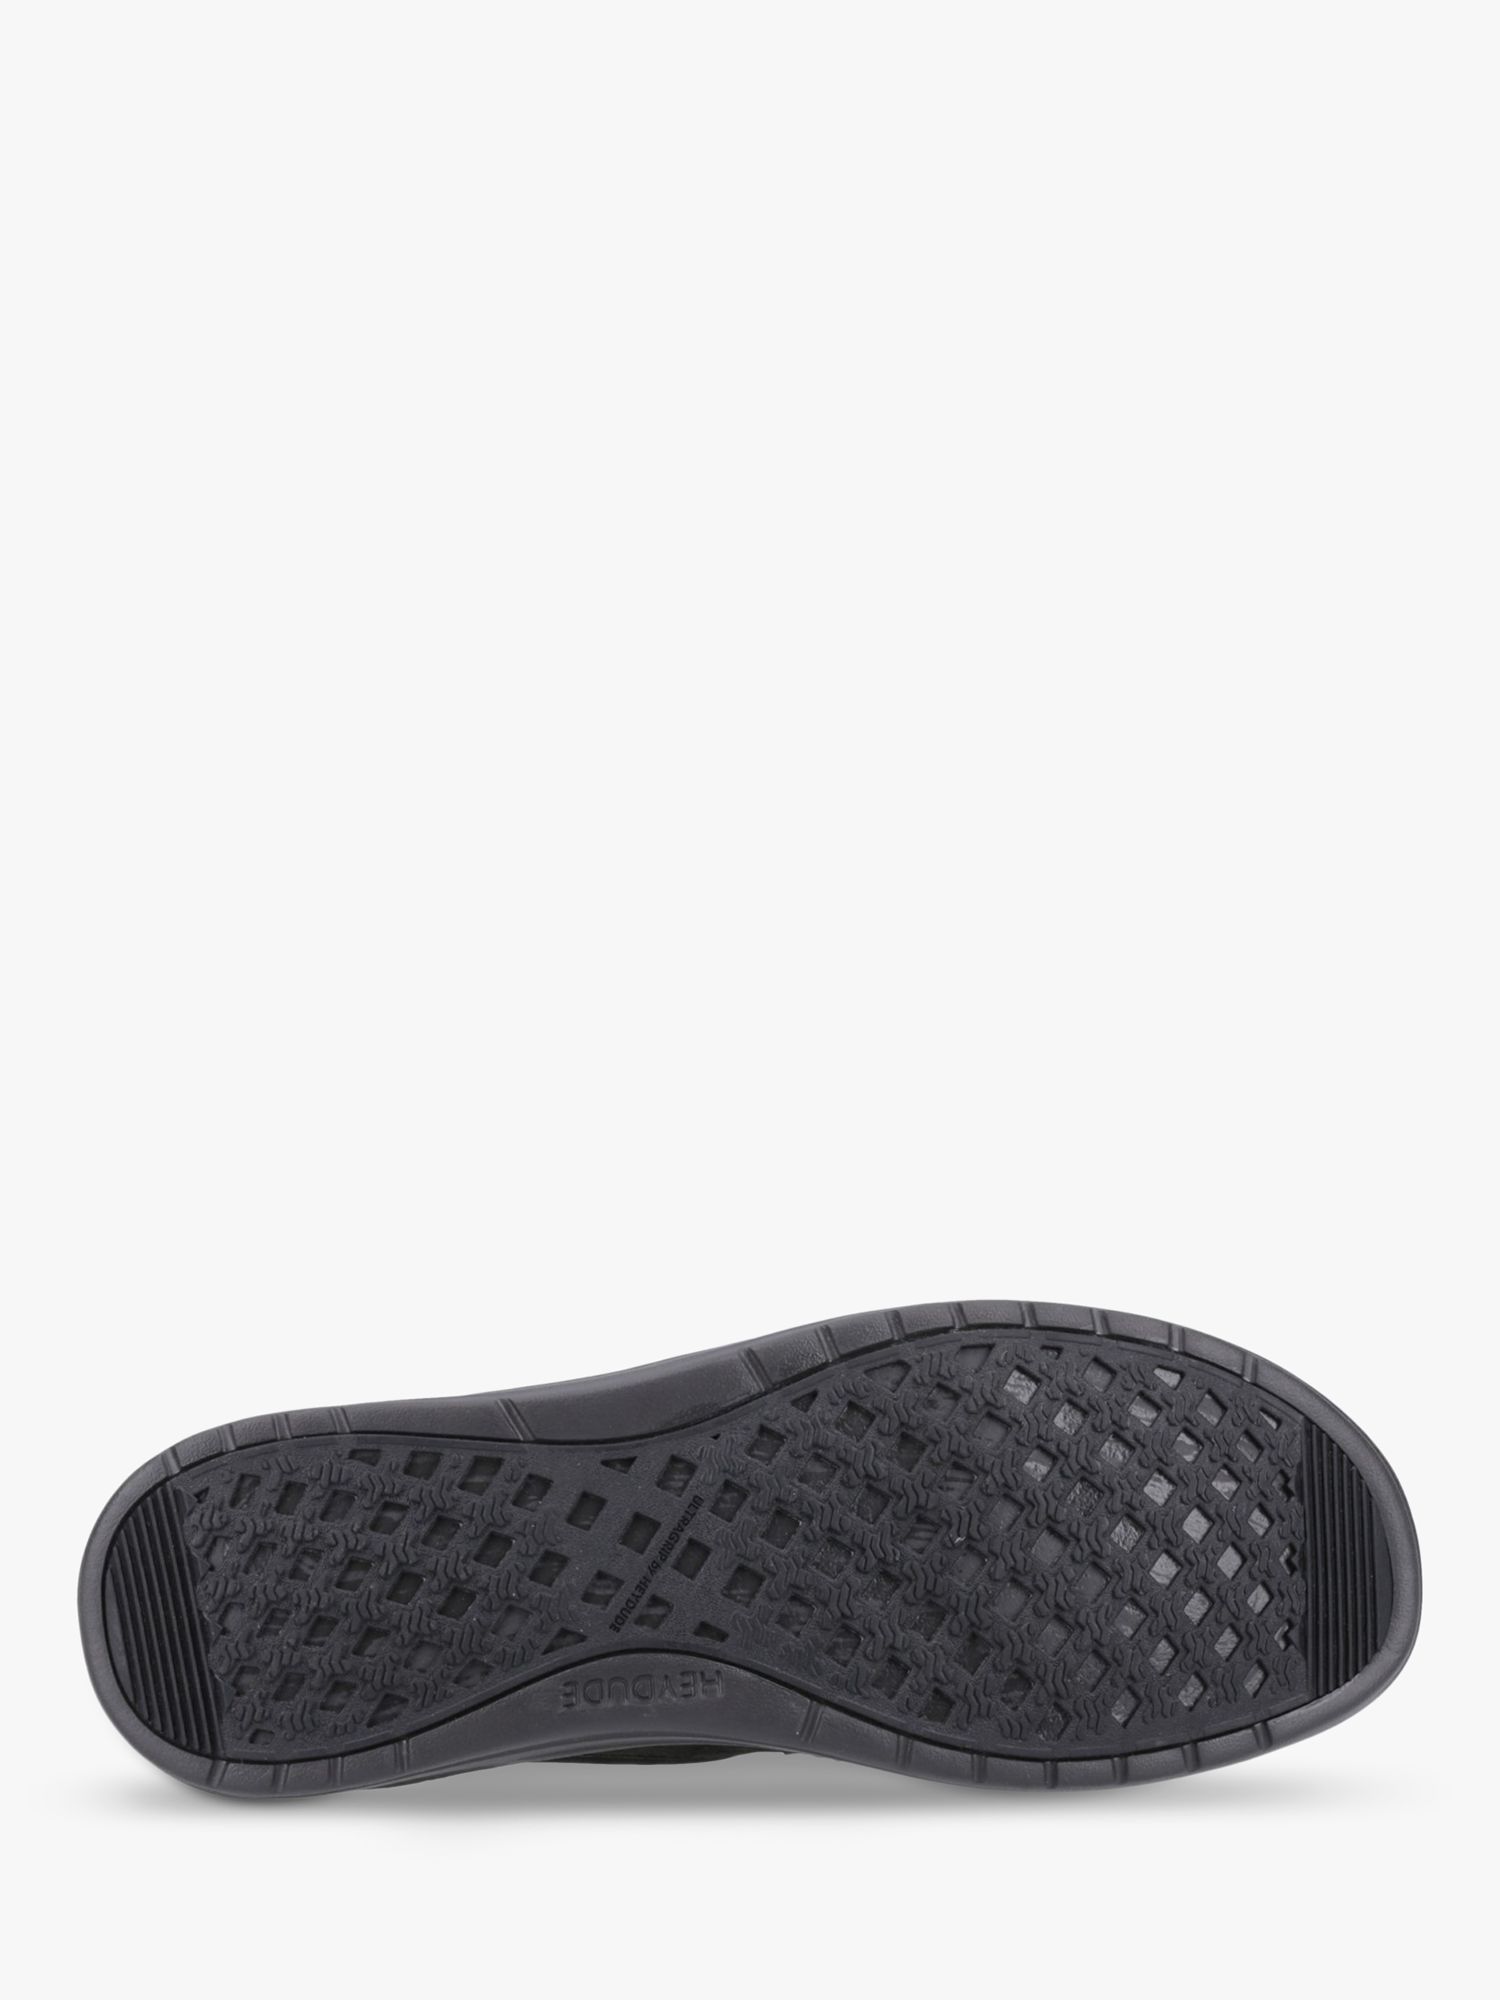 Buy Hey Dude Wally Grip Moccasin Shoes Online at johnlewis.com